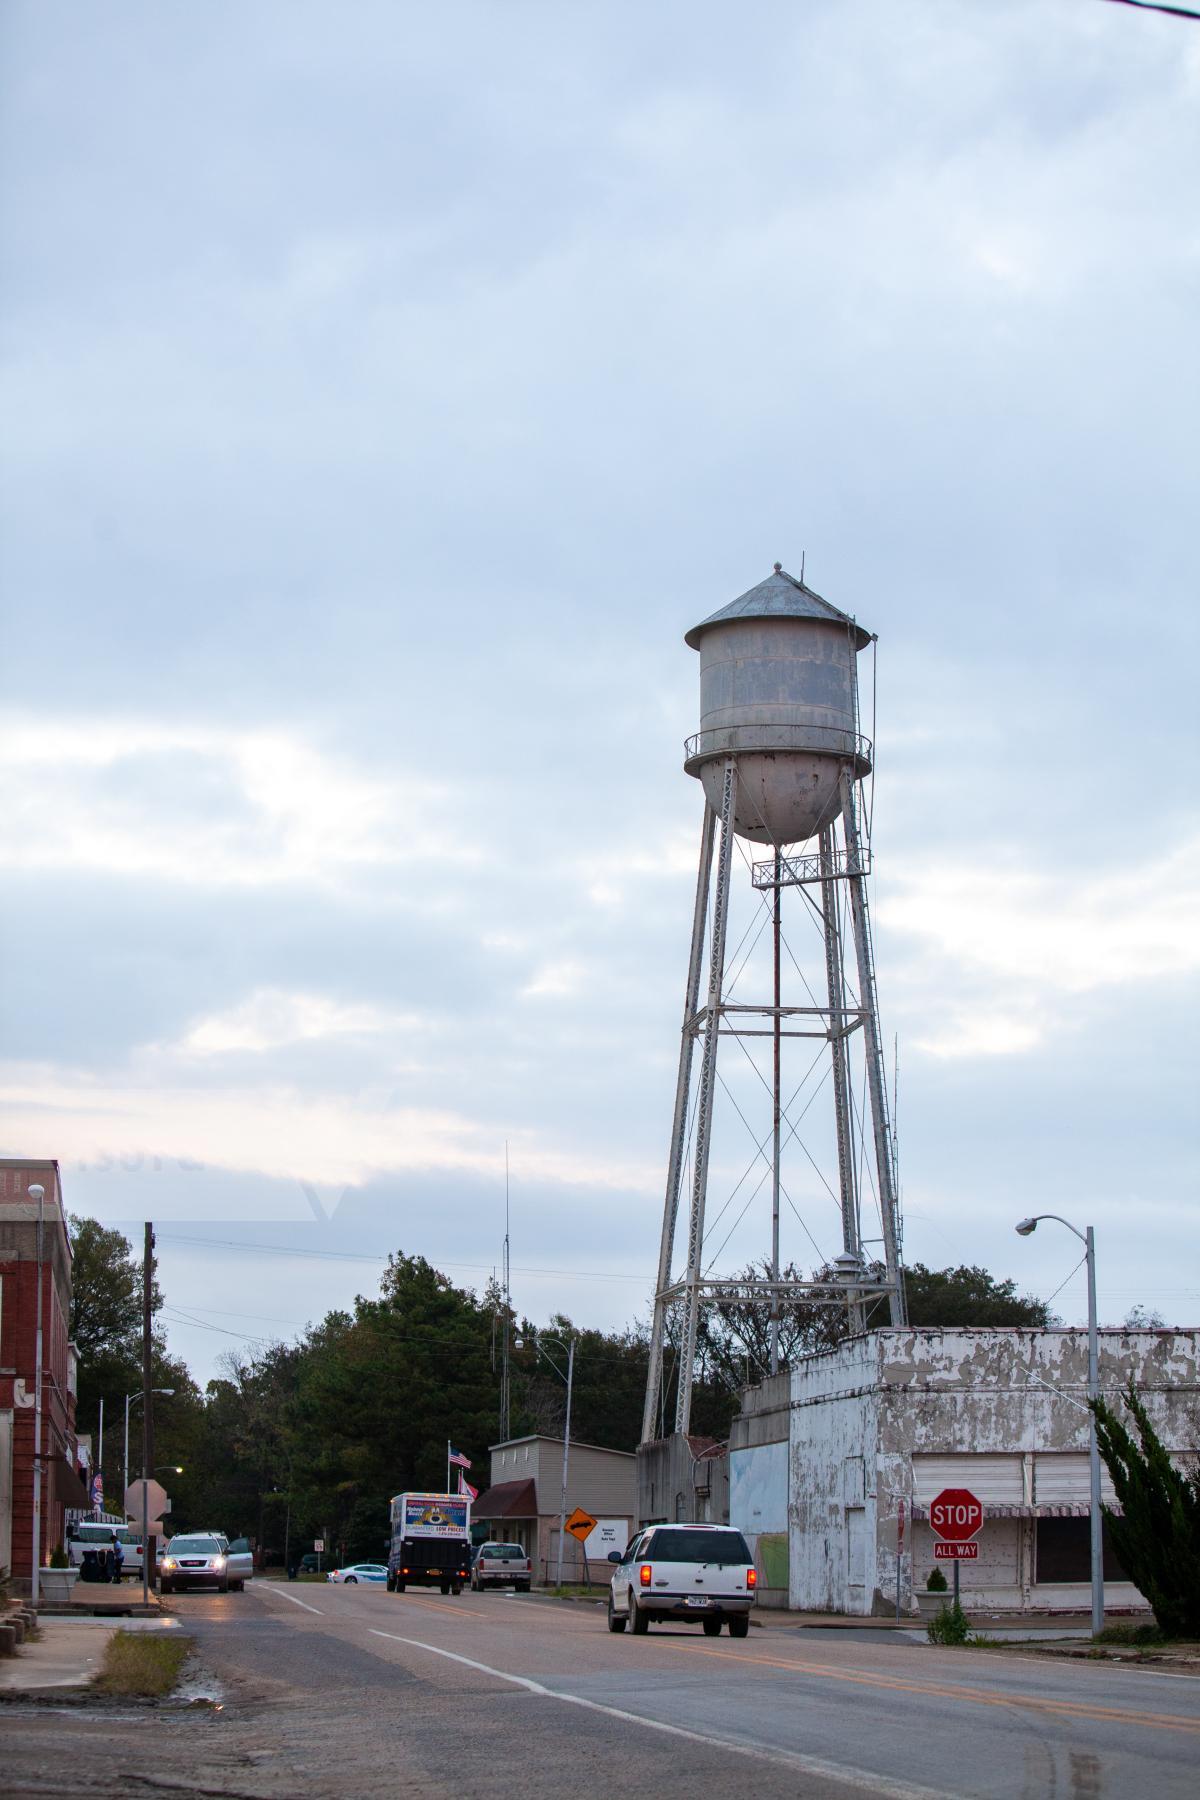 Purchase Water Tower in a Small Town in the American South by Katie Linsky Shaw